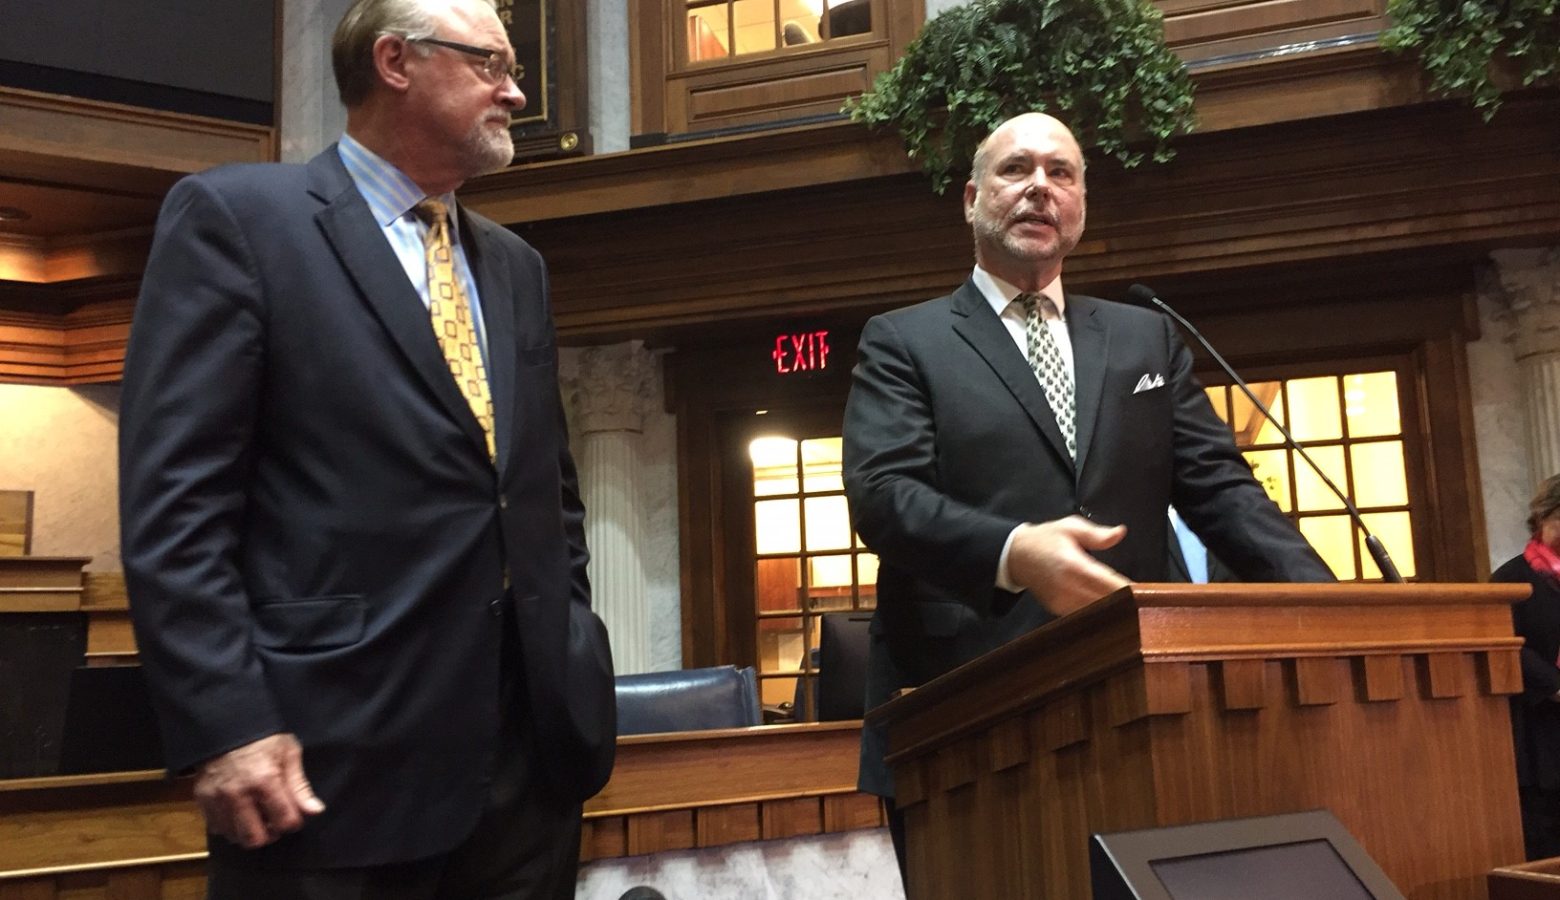 Senate President Pro Tem David Long (R-Fort Wayne), left, and House Speaker Brian Bosma (R-Indianapolis) will take the details of a road funding plan to their caucuses for approval. (Brandon Smith/IPB News)